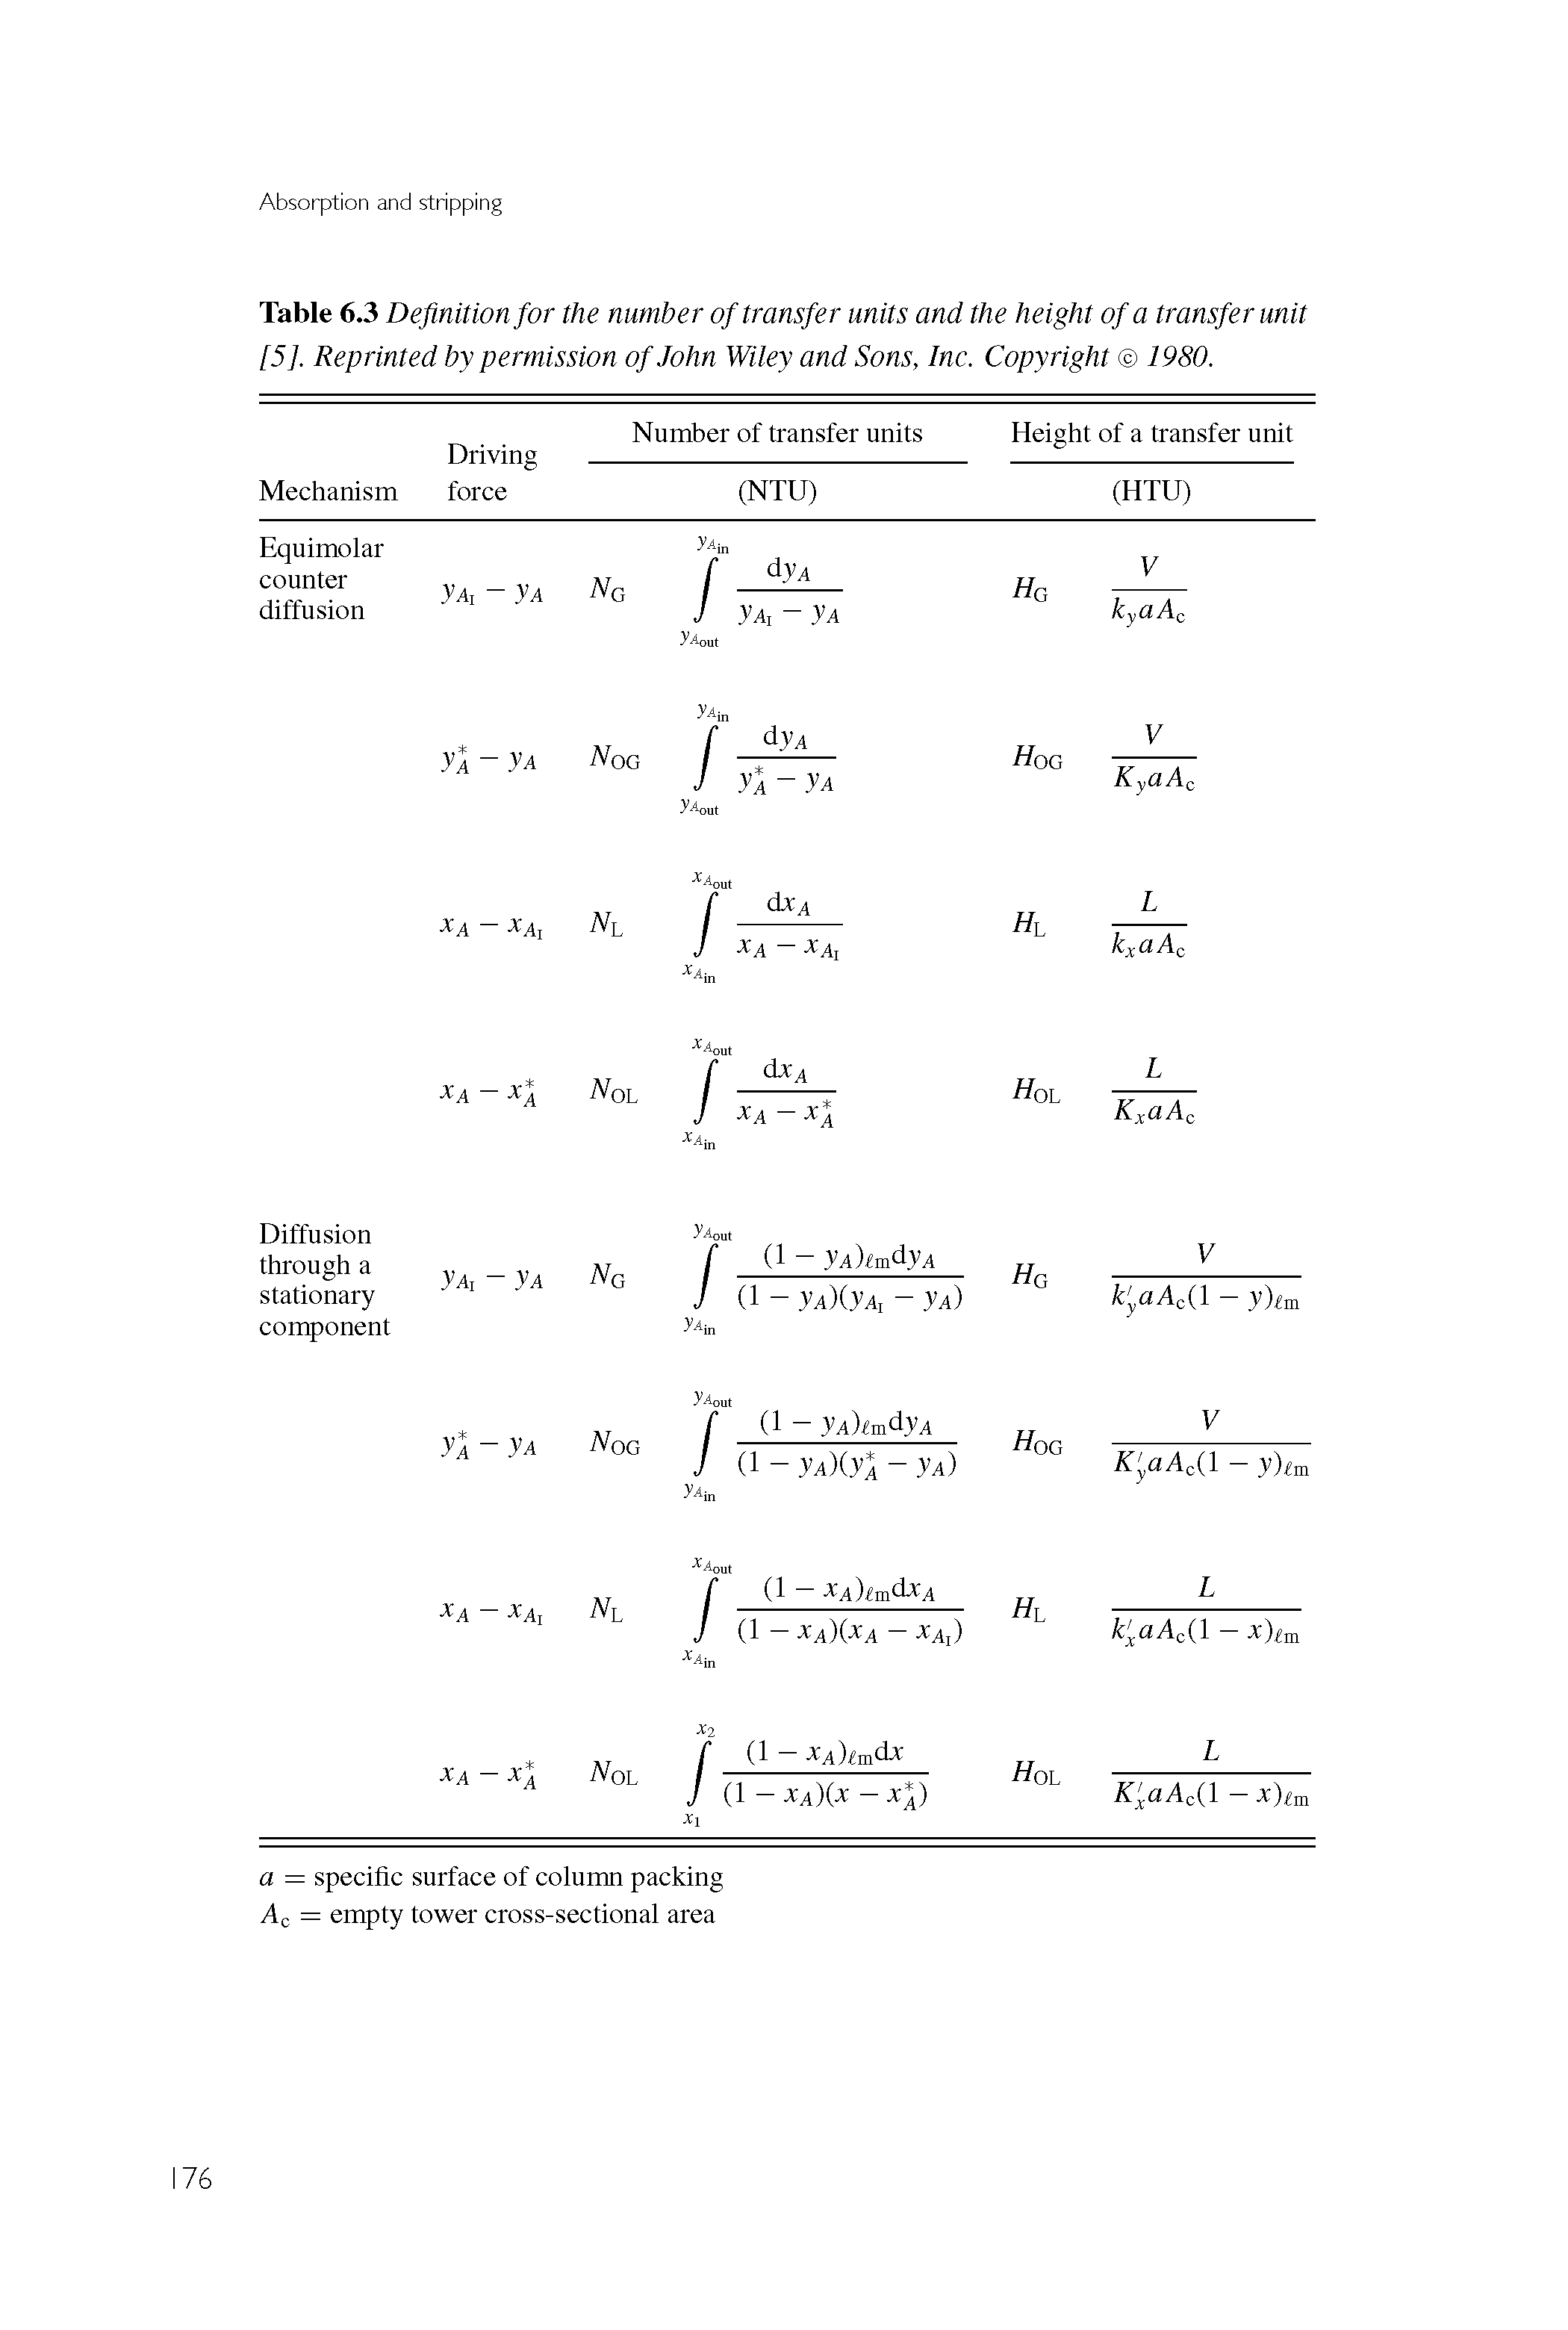 Table 6.3 Definition for the number of transfer units and the height of a transfer unit [5], Reprinted by permission of John Wiley and Sons, Inc. Copyright 1980.